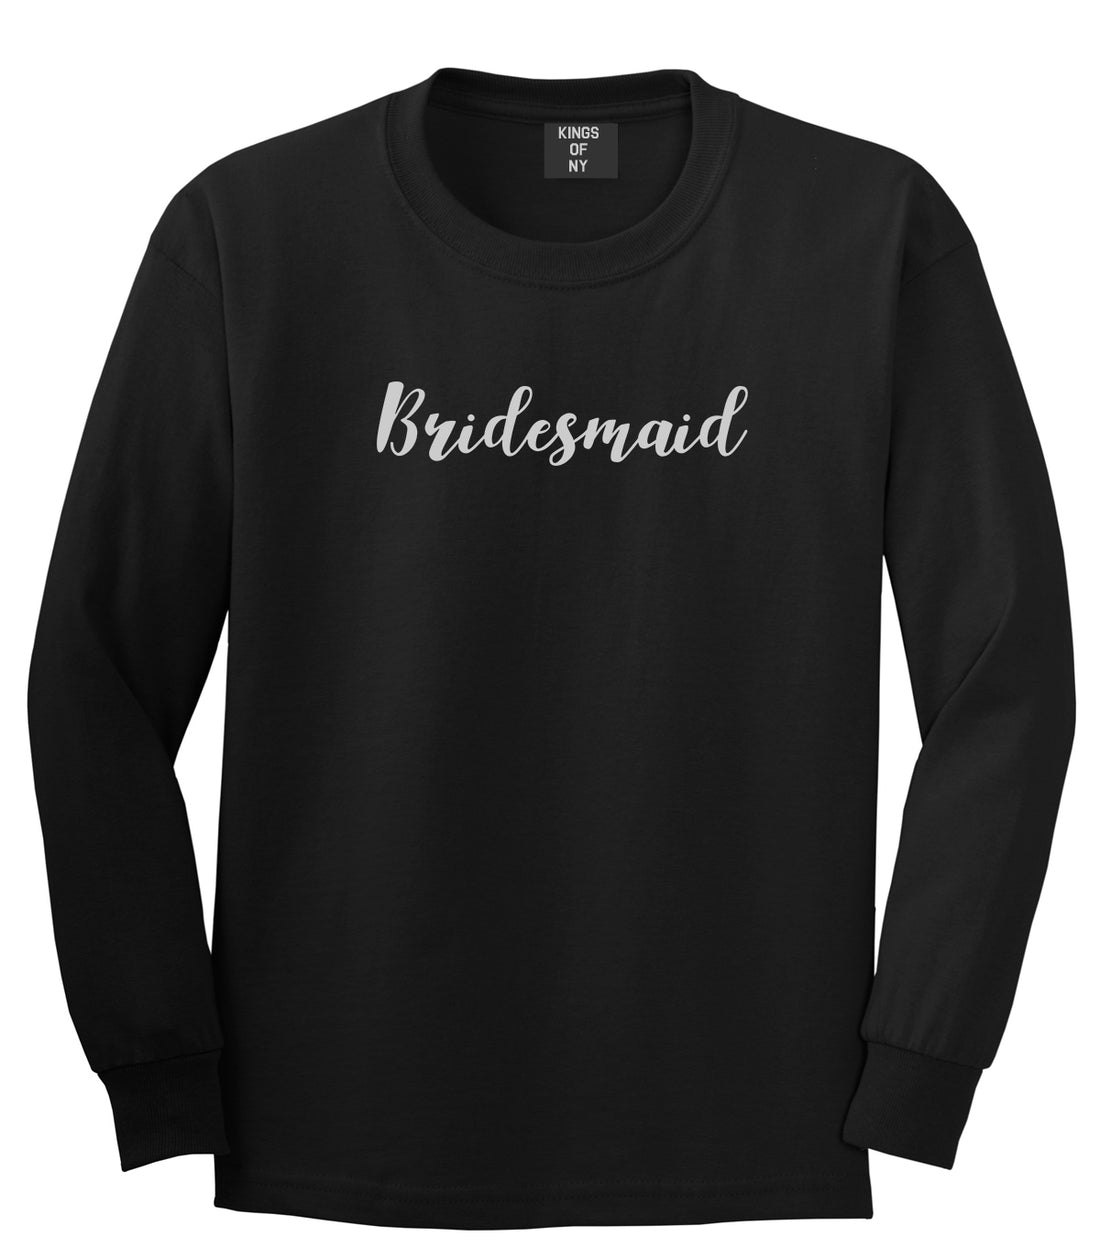 Bridesmaid Bachlorette Party Black Long Sleeve T-Shirt by Kings Of NY